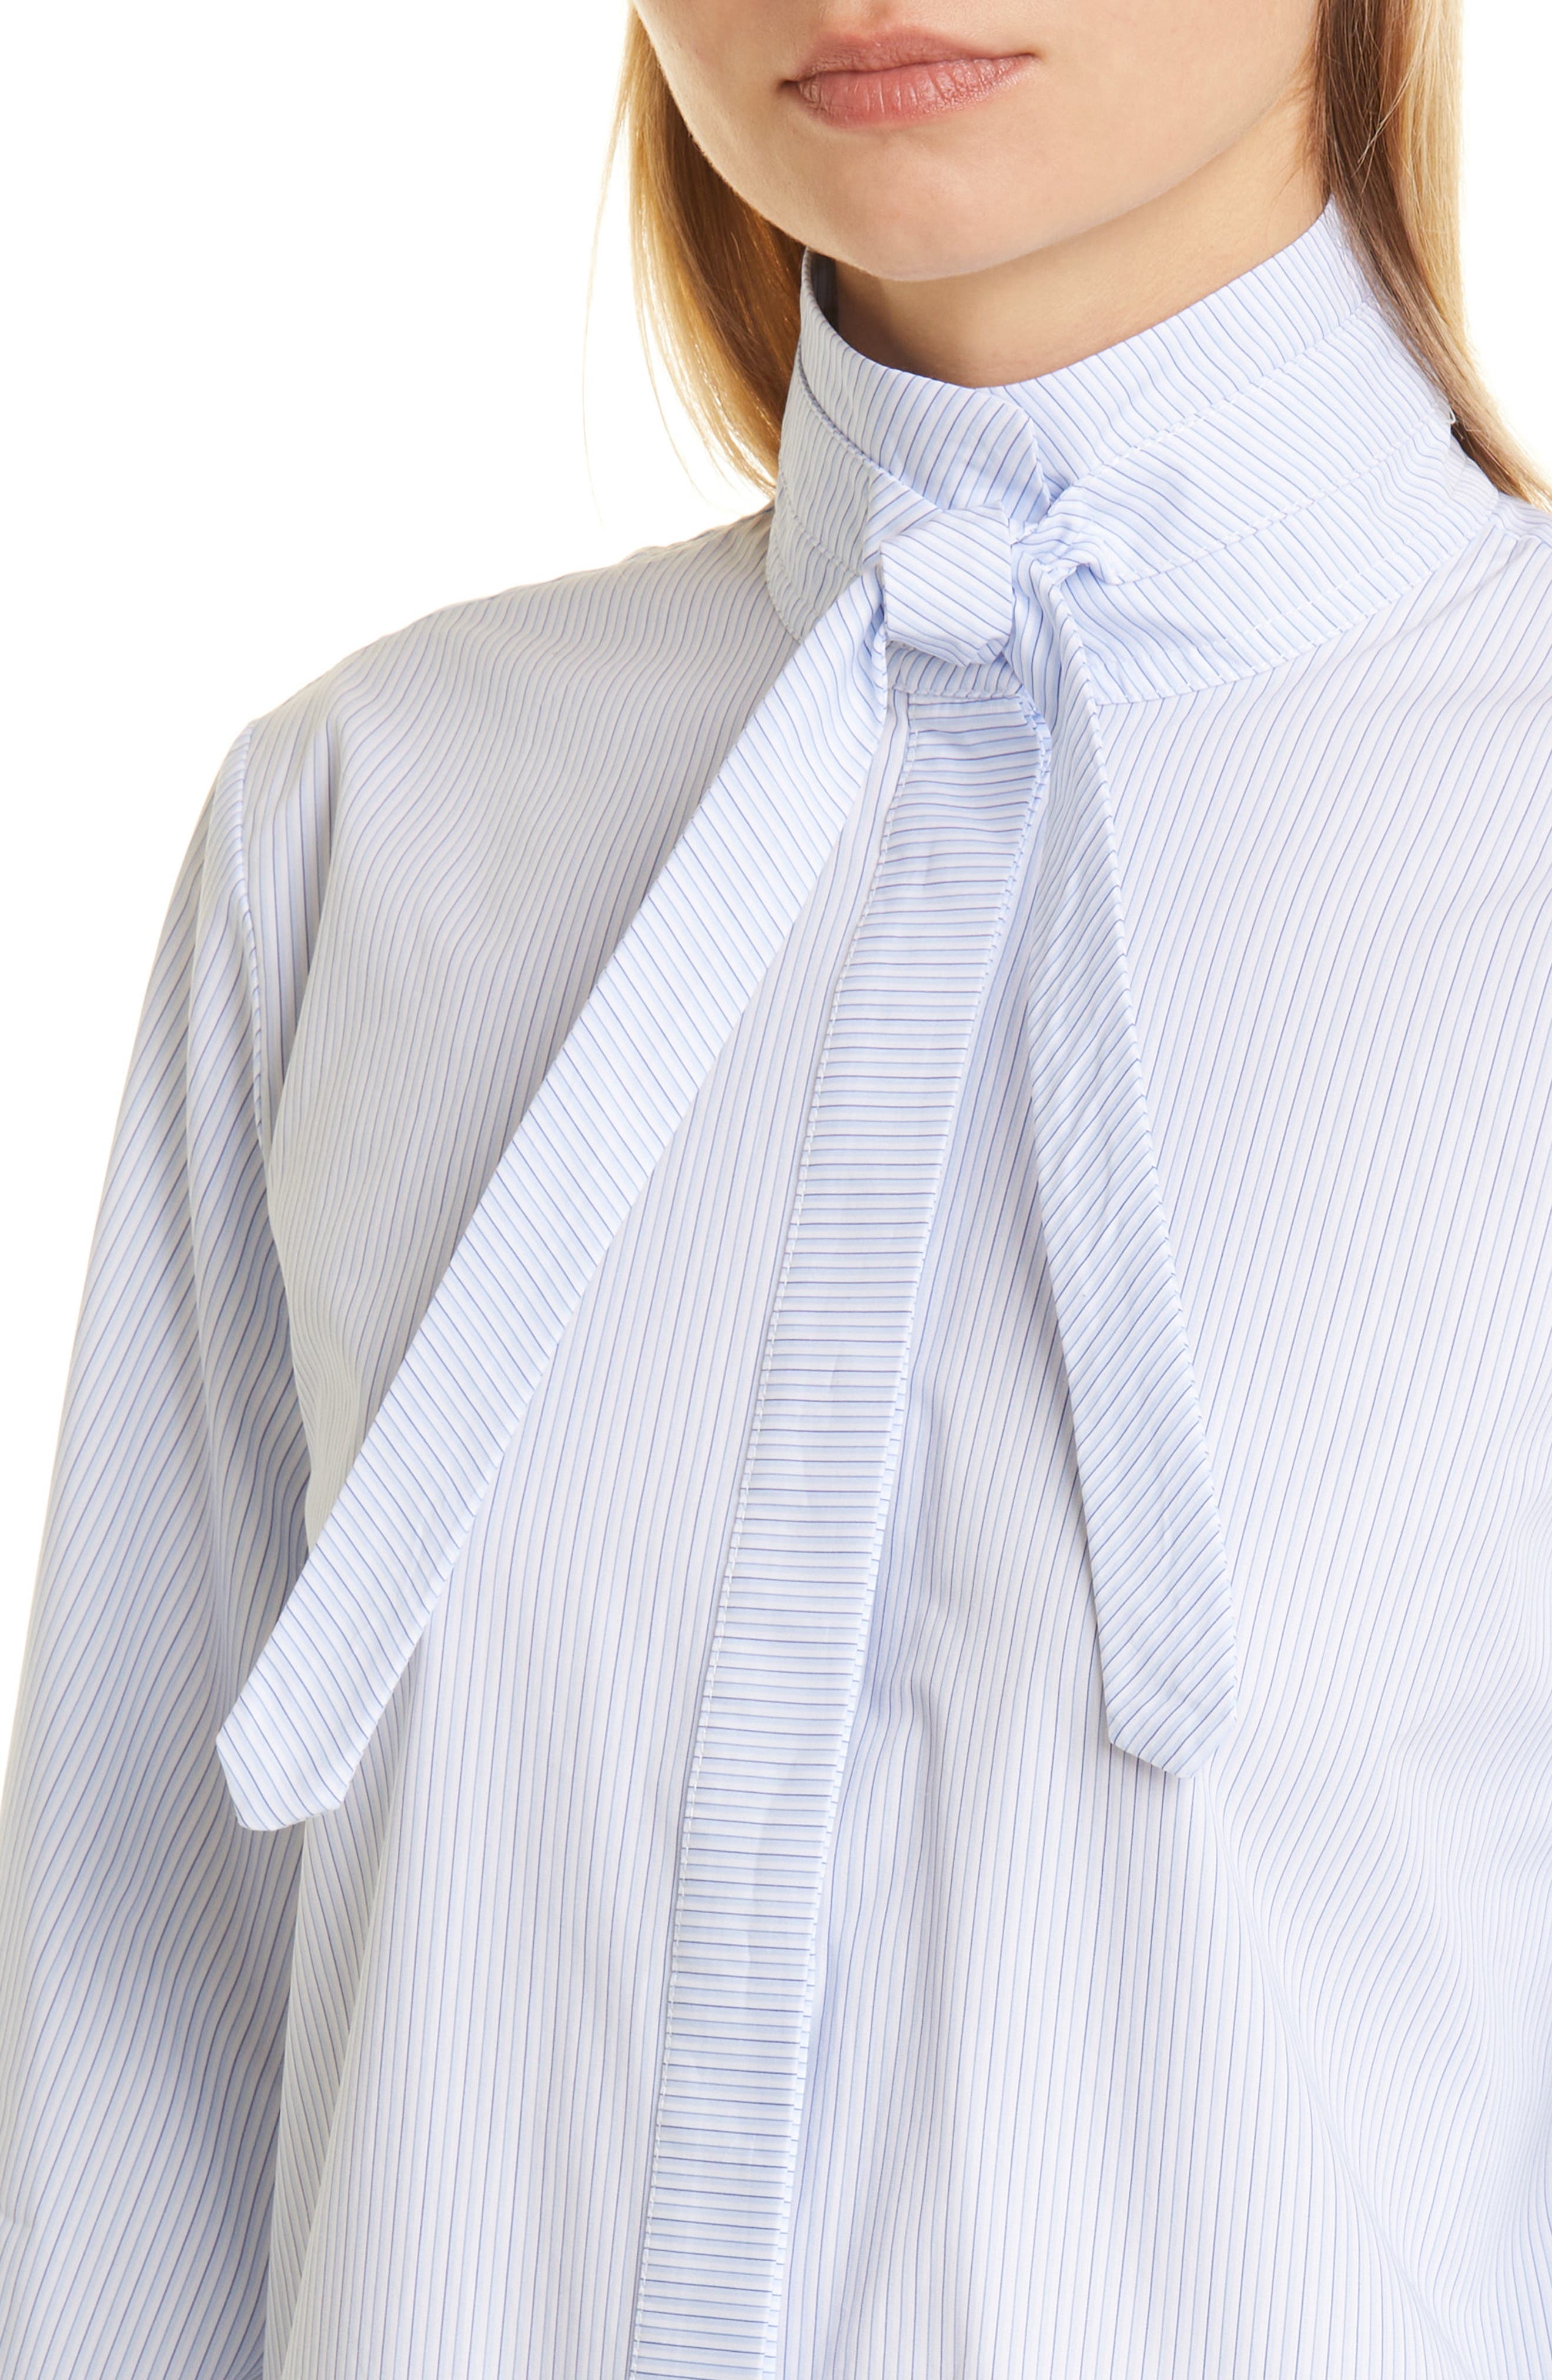 Nordstrom Clothing Shirts Mervis Tie Neck Cotton Shirt in Cambridge White/Baby Blue at Nordstrom 